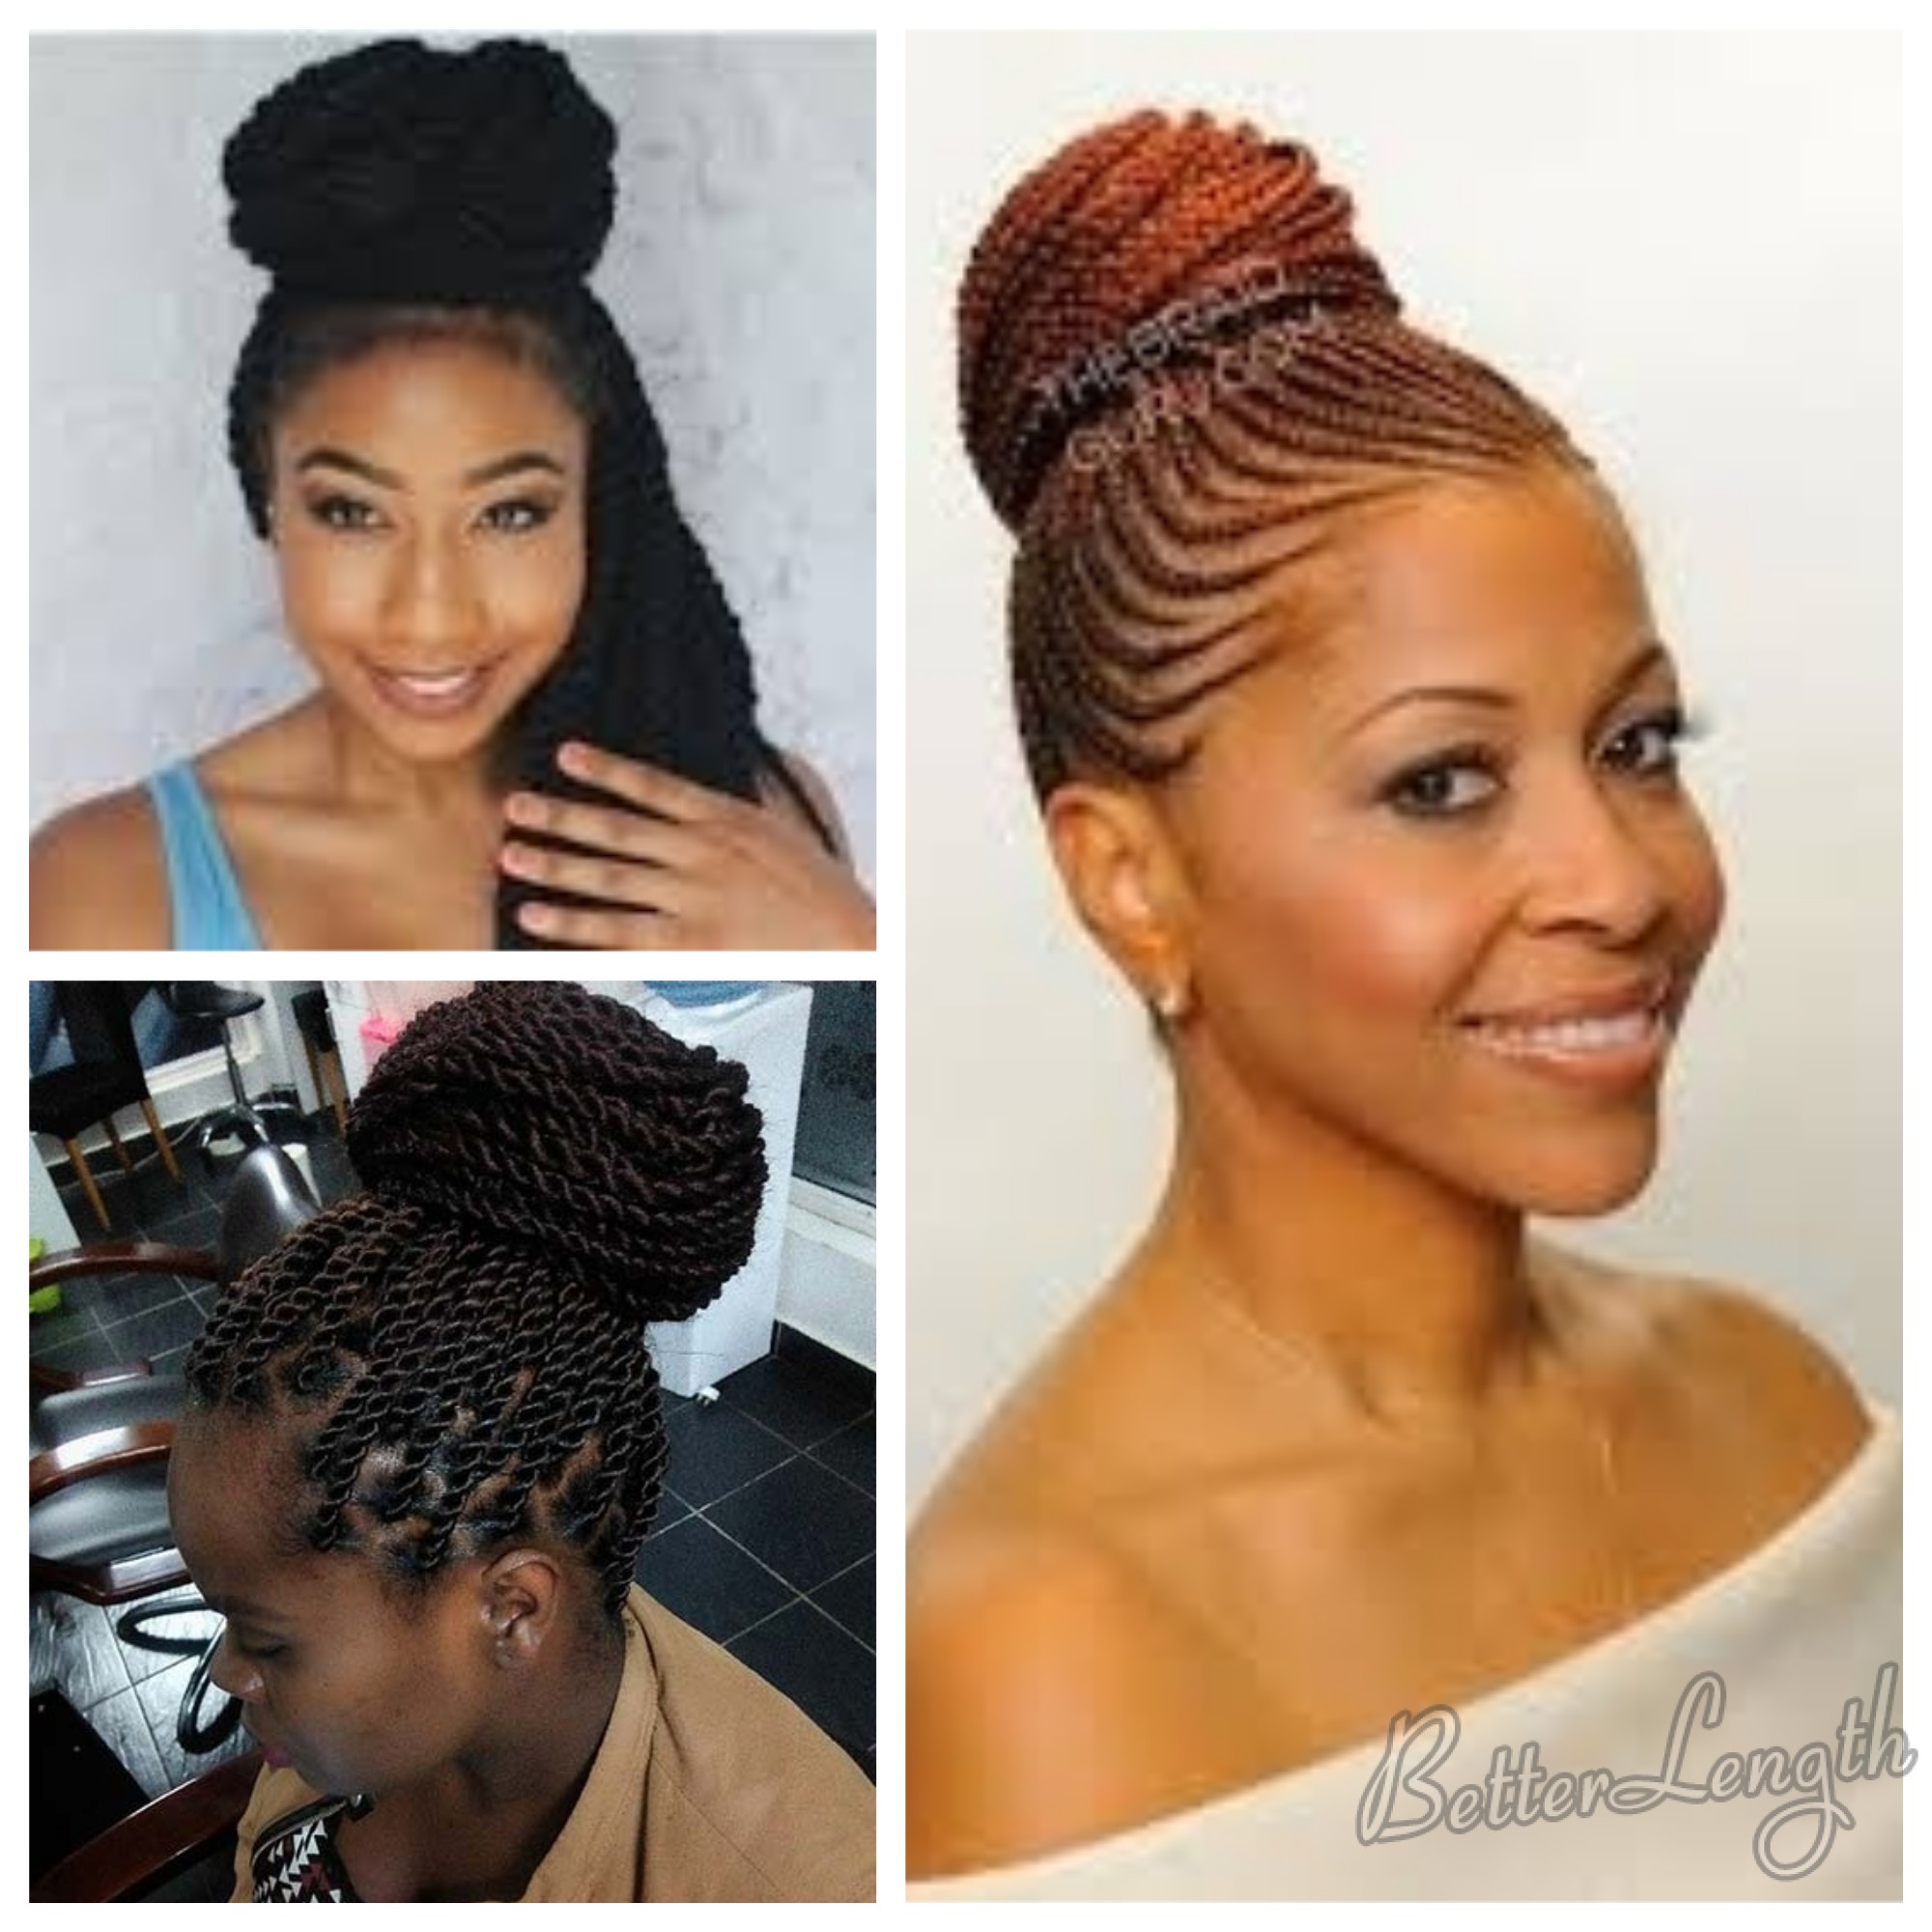 The 7 Best Summer Protective Hairstyles to Try This Season